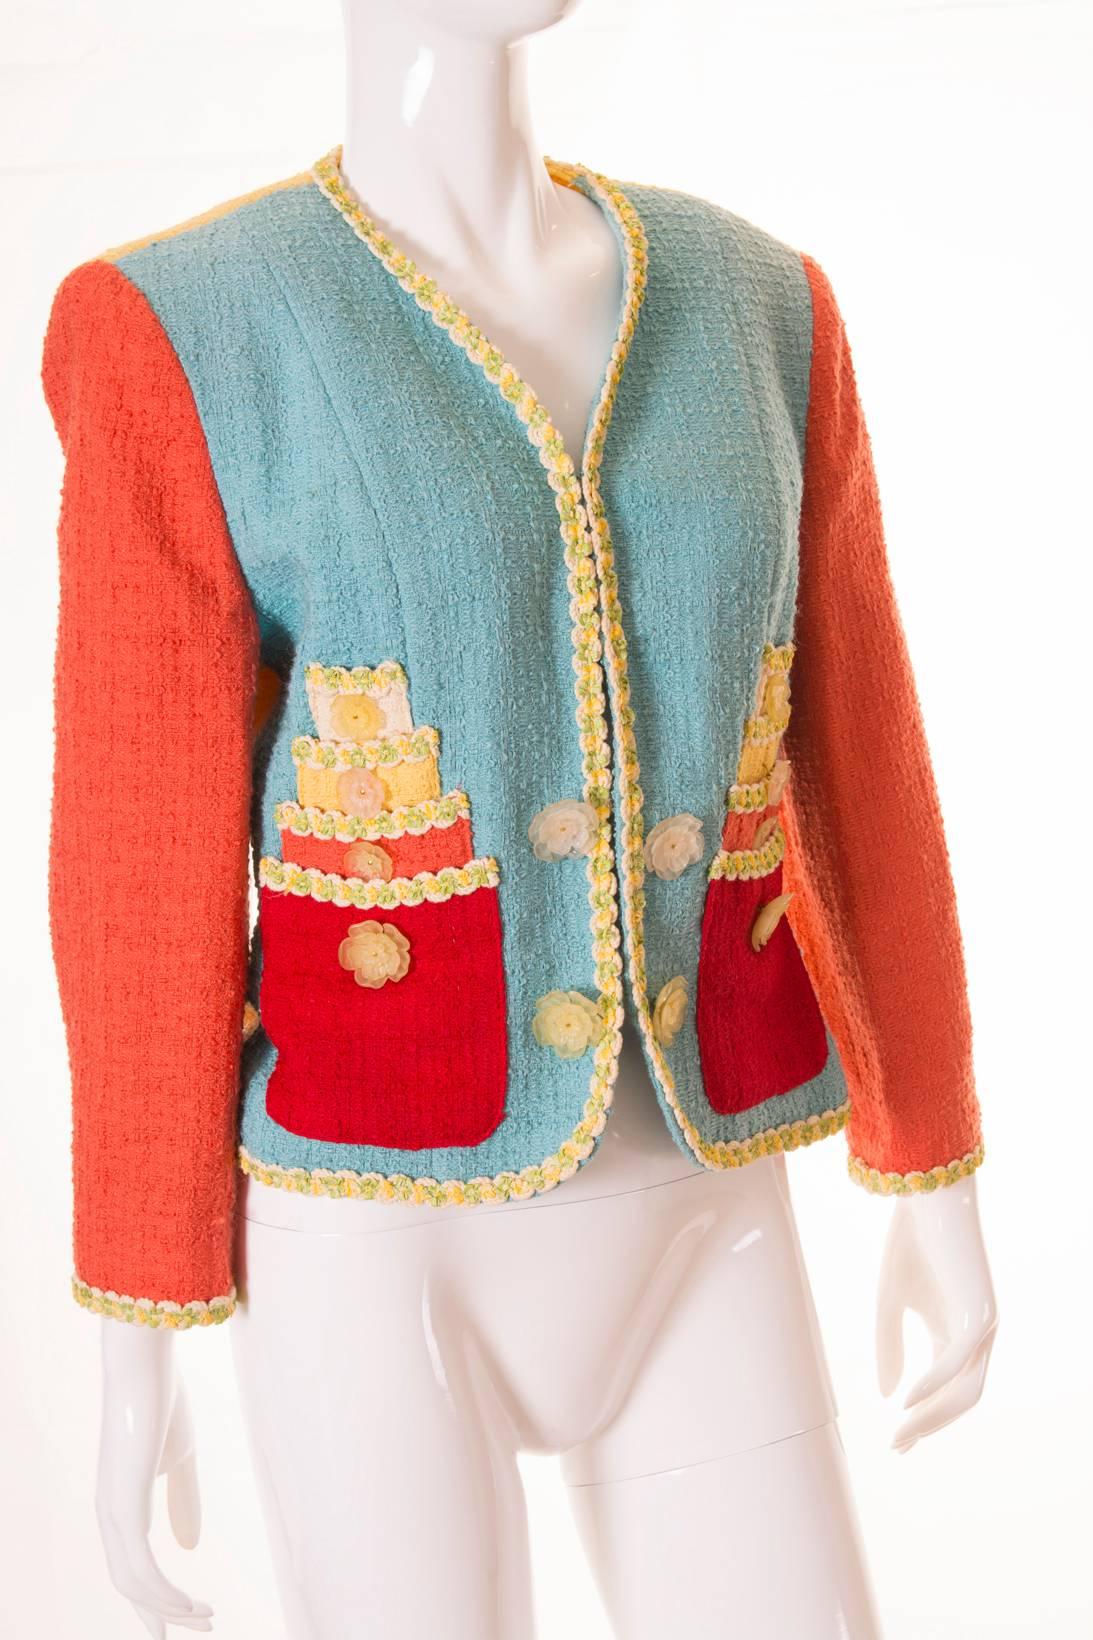 This Chanel-style Cheap and Chic jacket features the most adorable cake applique on the front. We love the boucle in contrasting pastel colours; pastel blue, coral, yellow and cream is offset with vibrant red. Frosted, novelty floral buttons at the